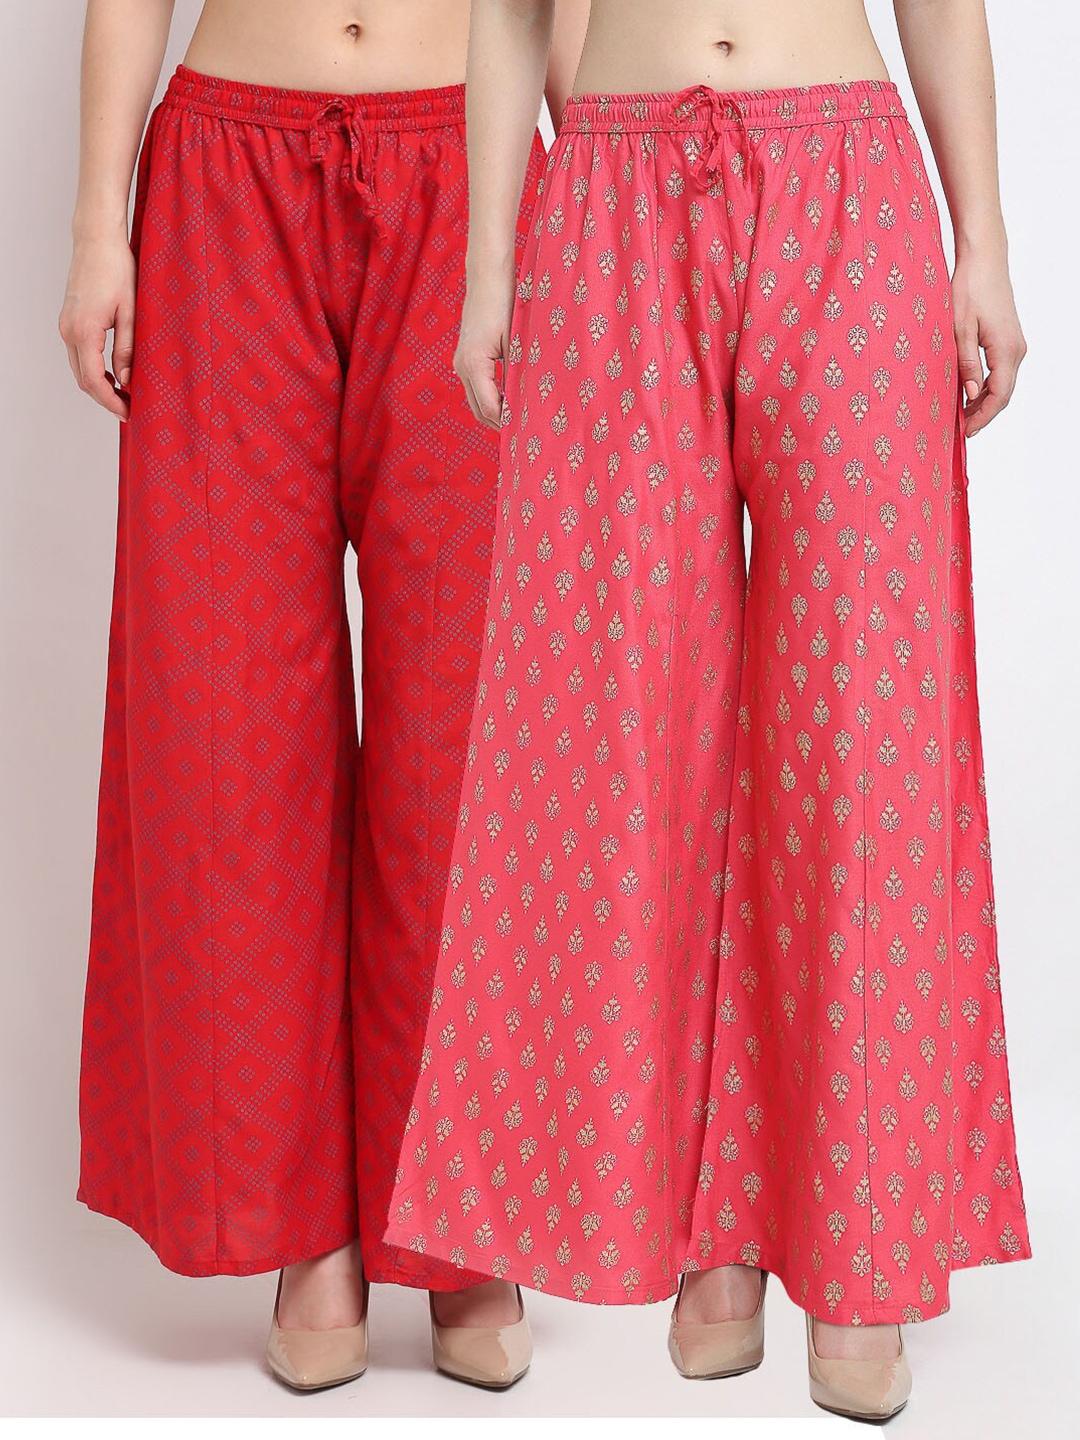 gracit-women-red-&-pink-2-printed-knitted-ethnic-palazzos